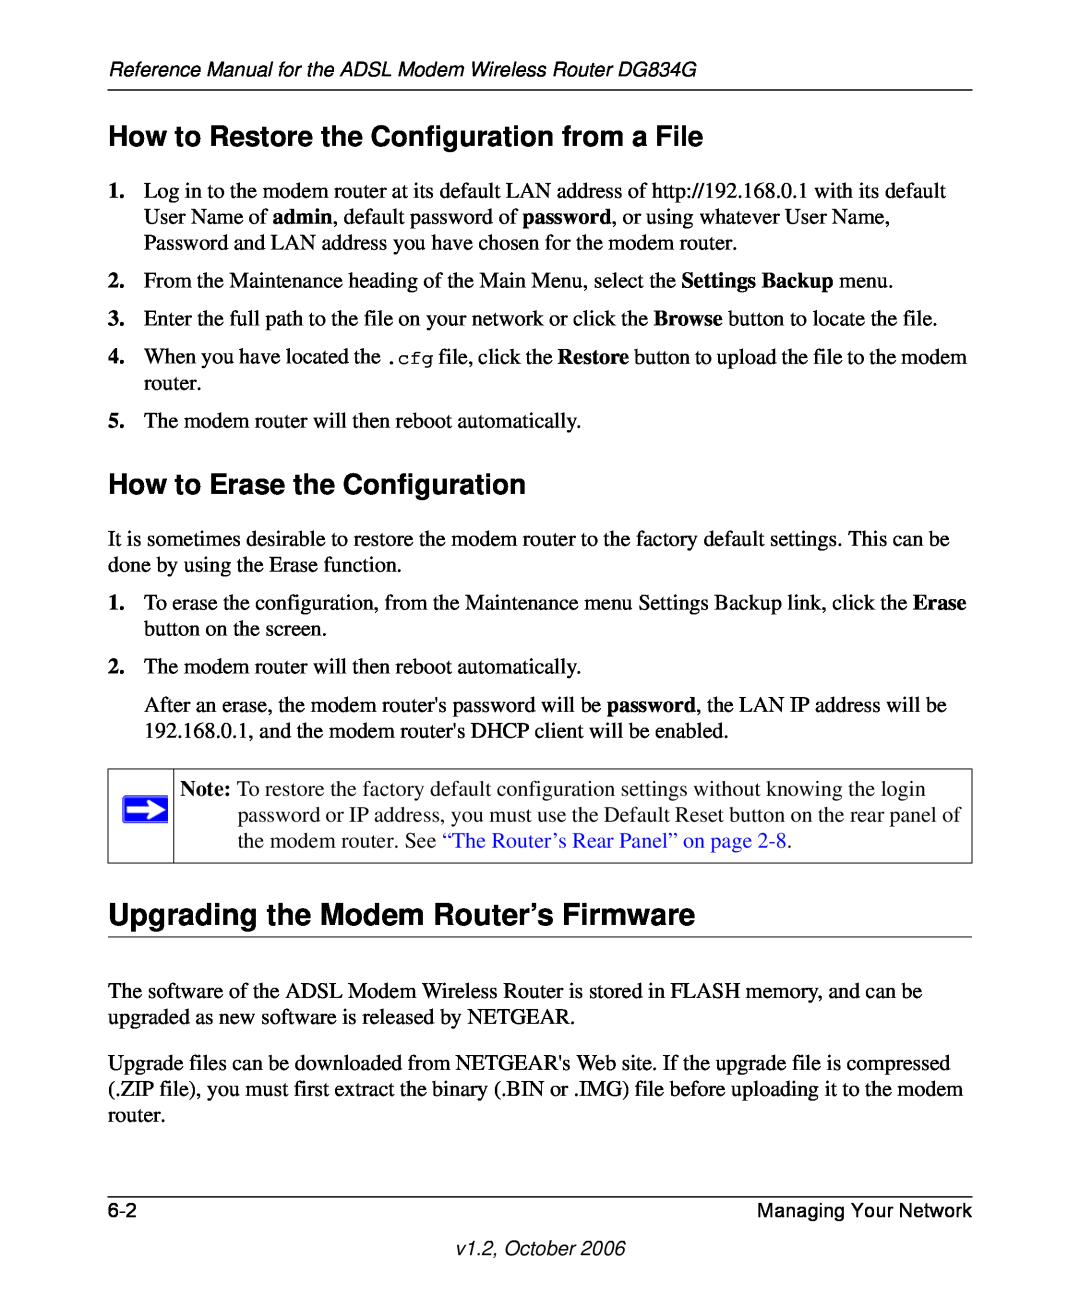 NETGEAR DG834G manual Upgrading the Modem Router’s Firmware, How to Restore the Configuration from a File 